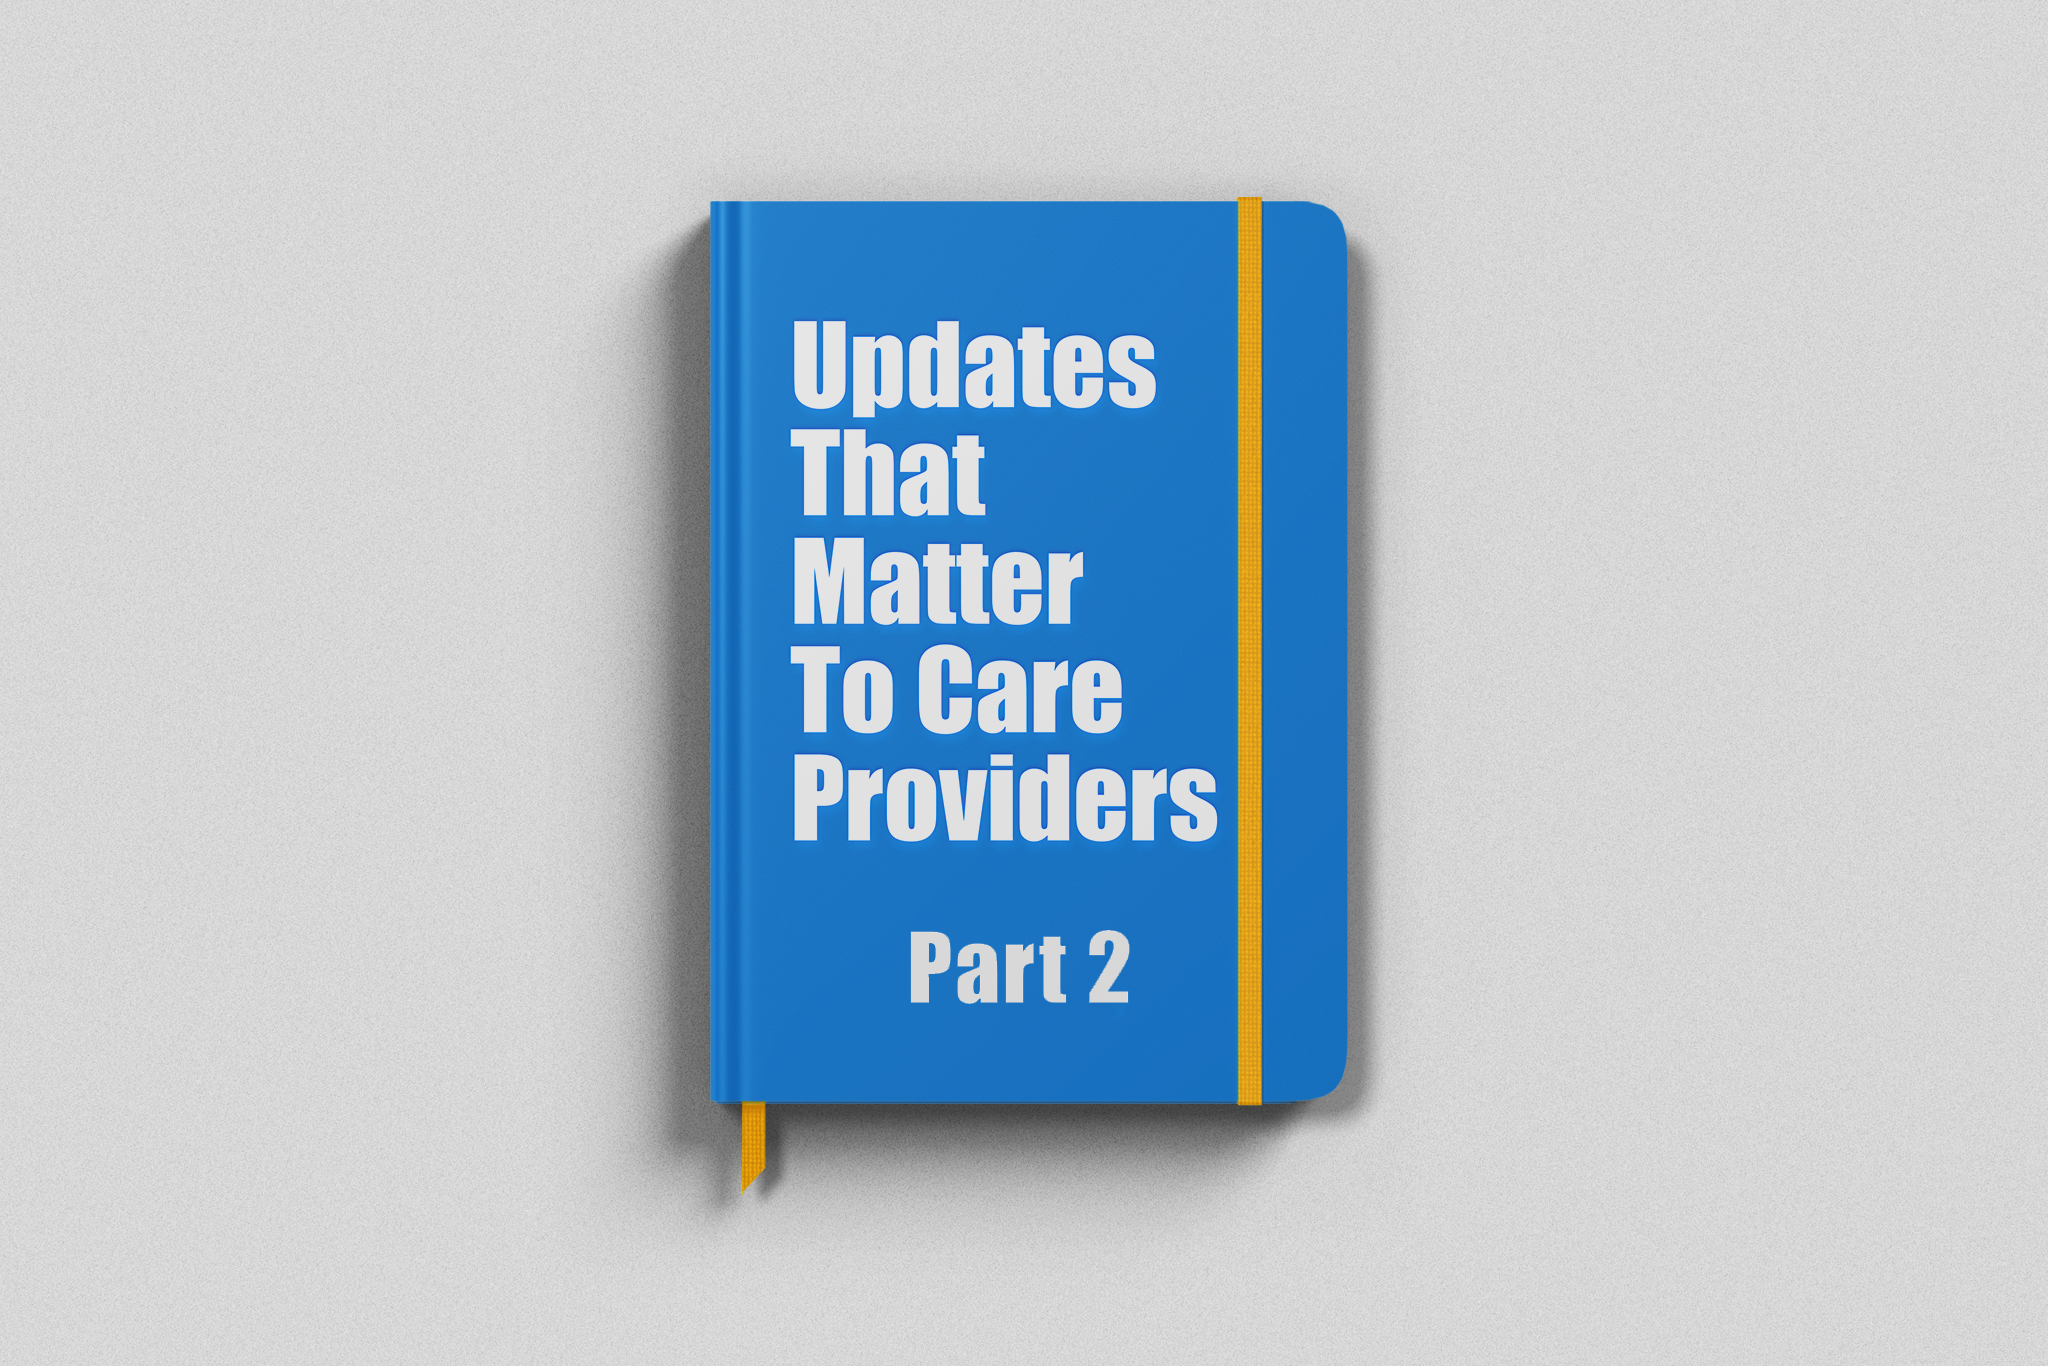 Updates That Matter to Care Providers - Part 2